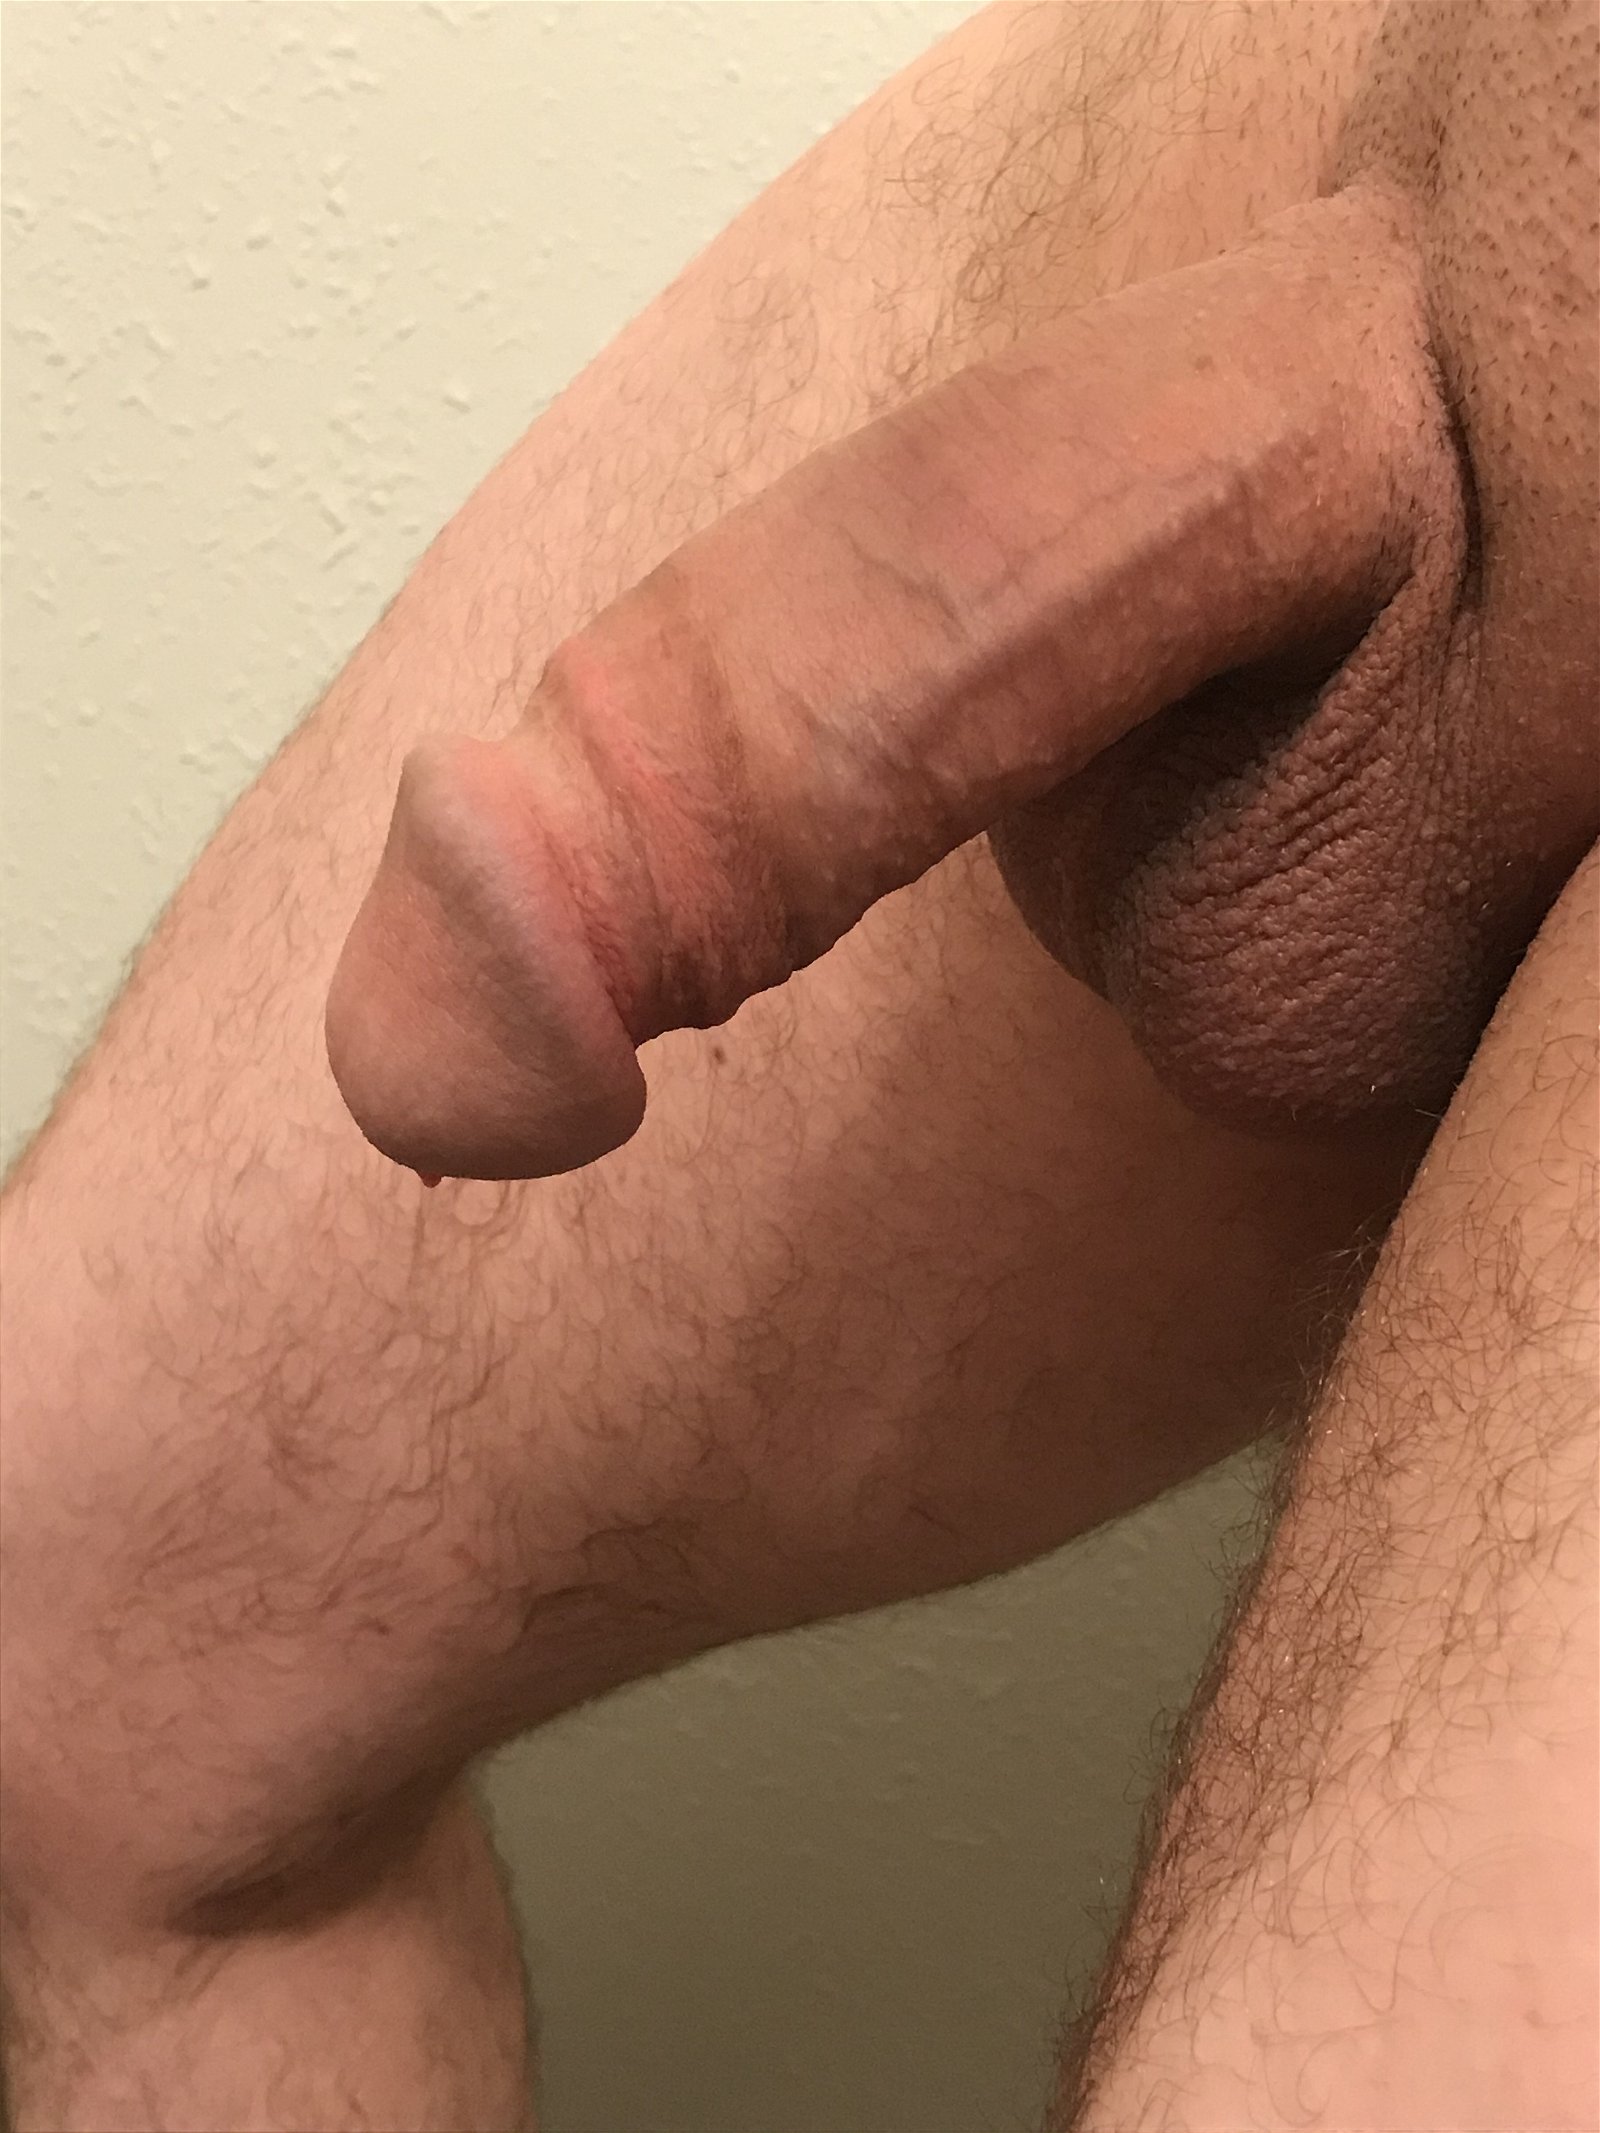 Photo by MrD1021613 with the username @MrD1021613,  January 9, 2021 at 11:57 PM. The post is about the topic Rate my pussy or dick and the text says 'You should see what I can do when i'm excited 😈'